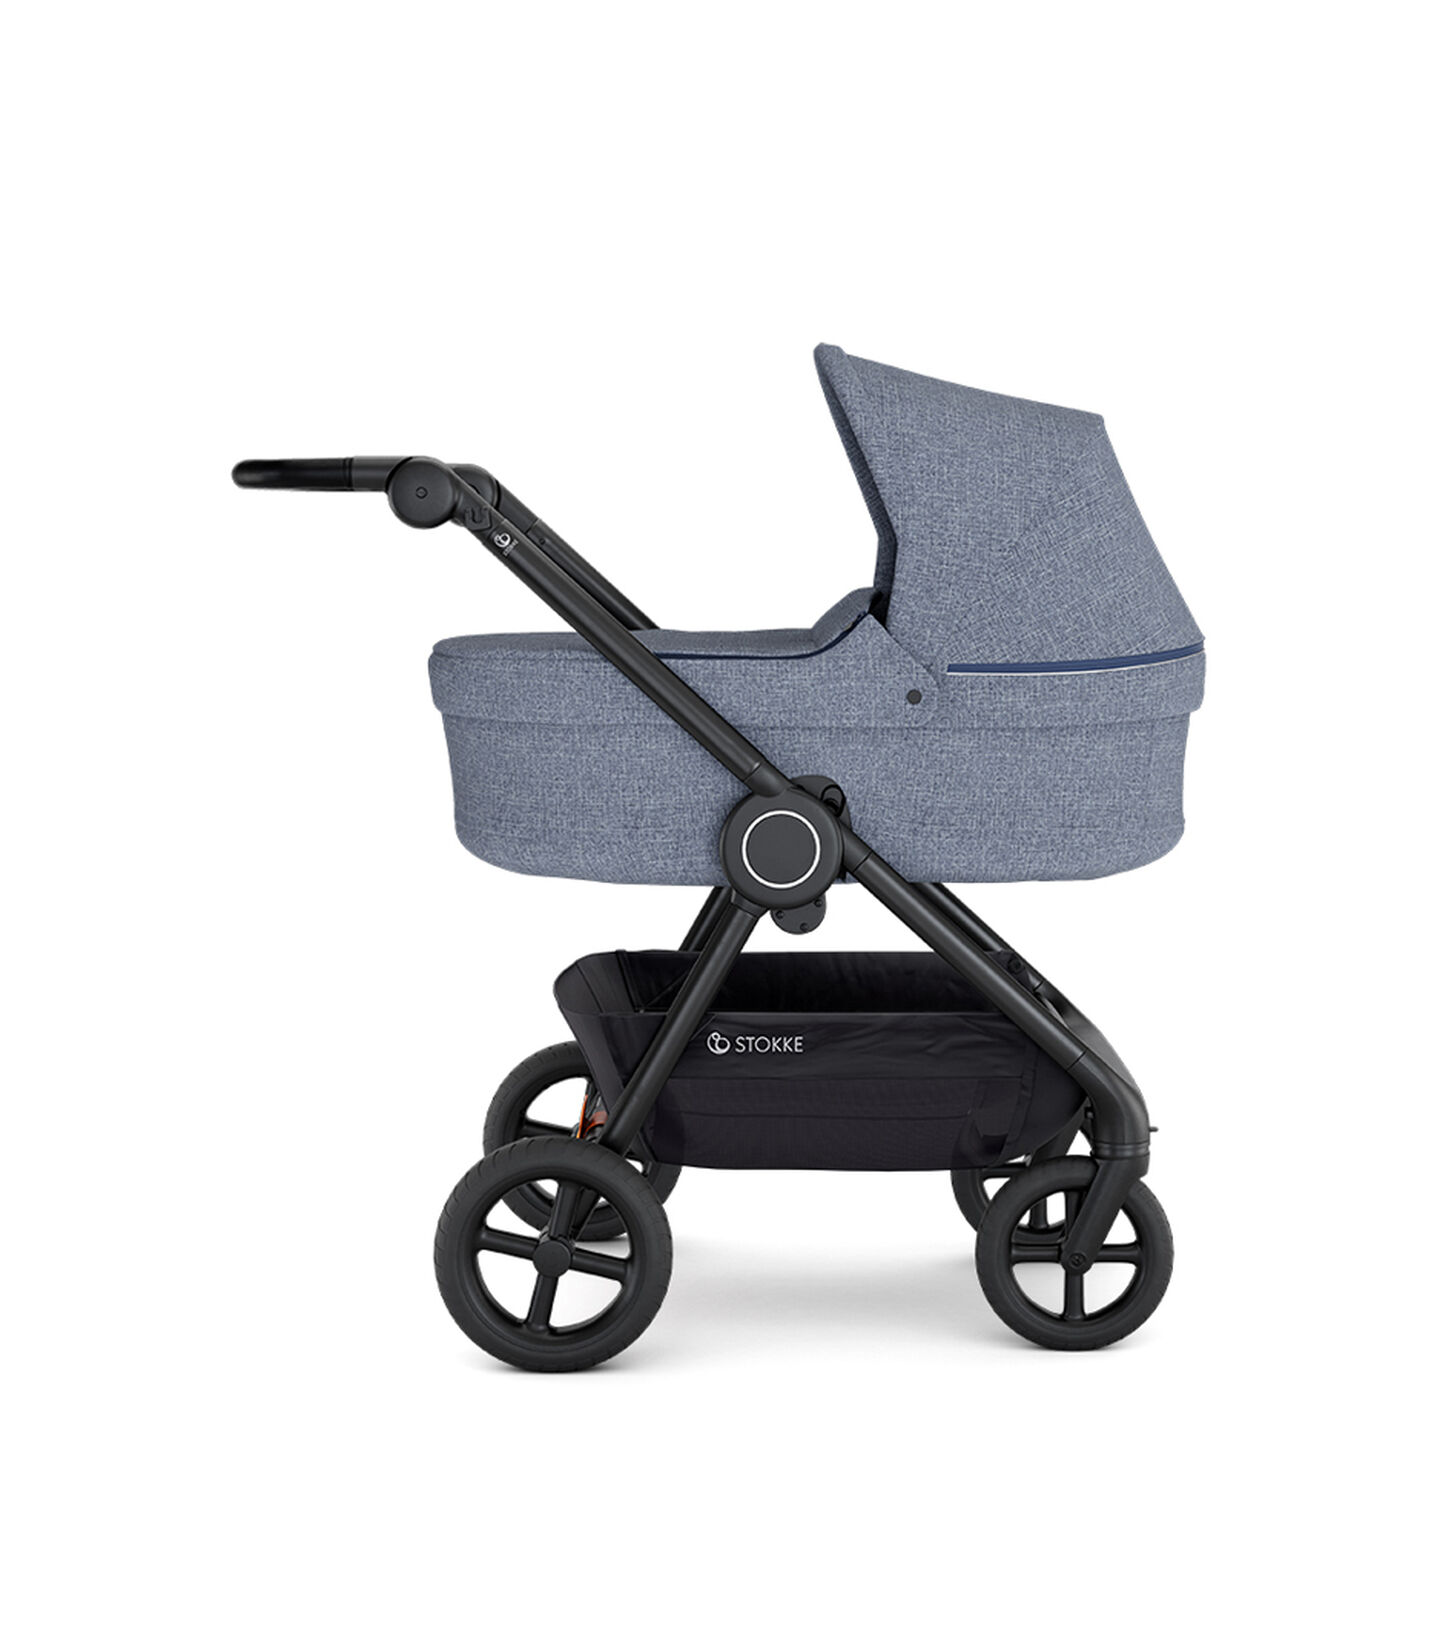 Stokke® Beat Carry Cot Blue Melange, 藍麻色, mainview view 3